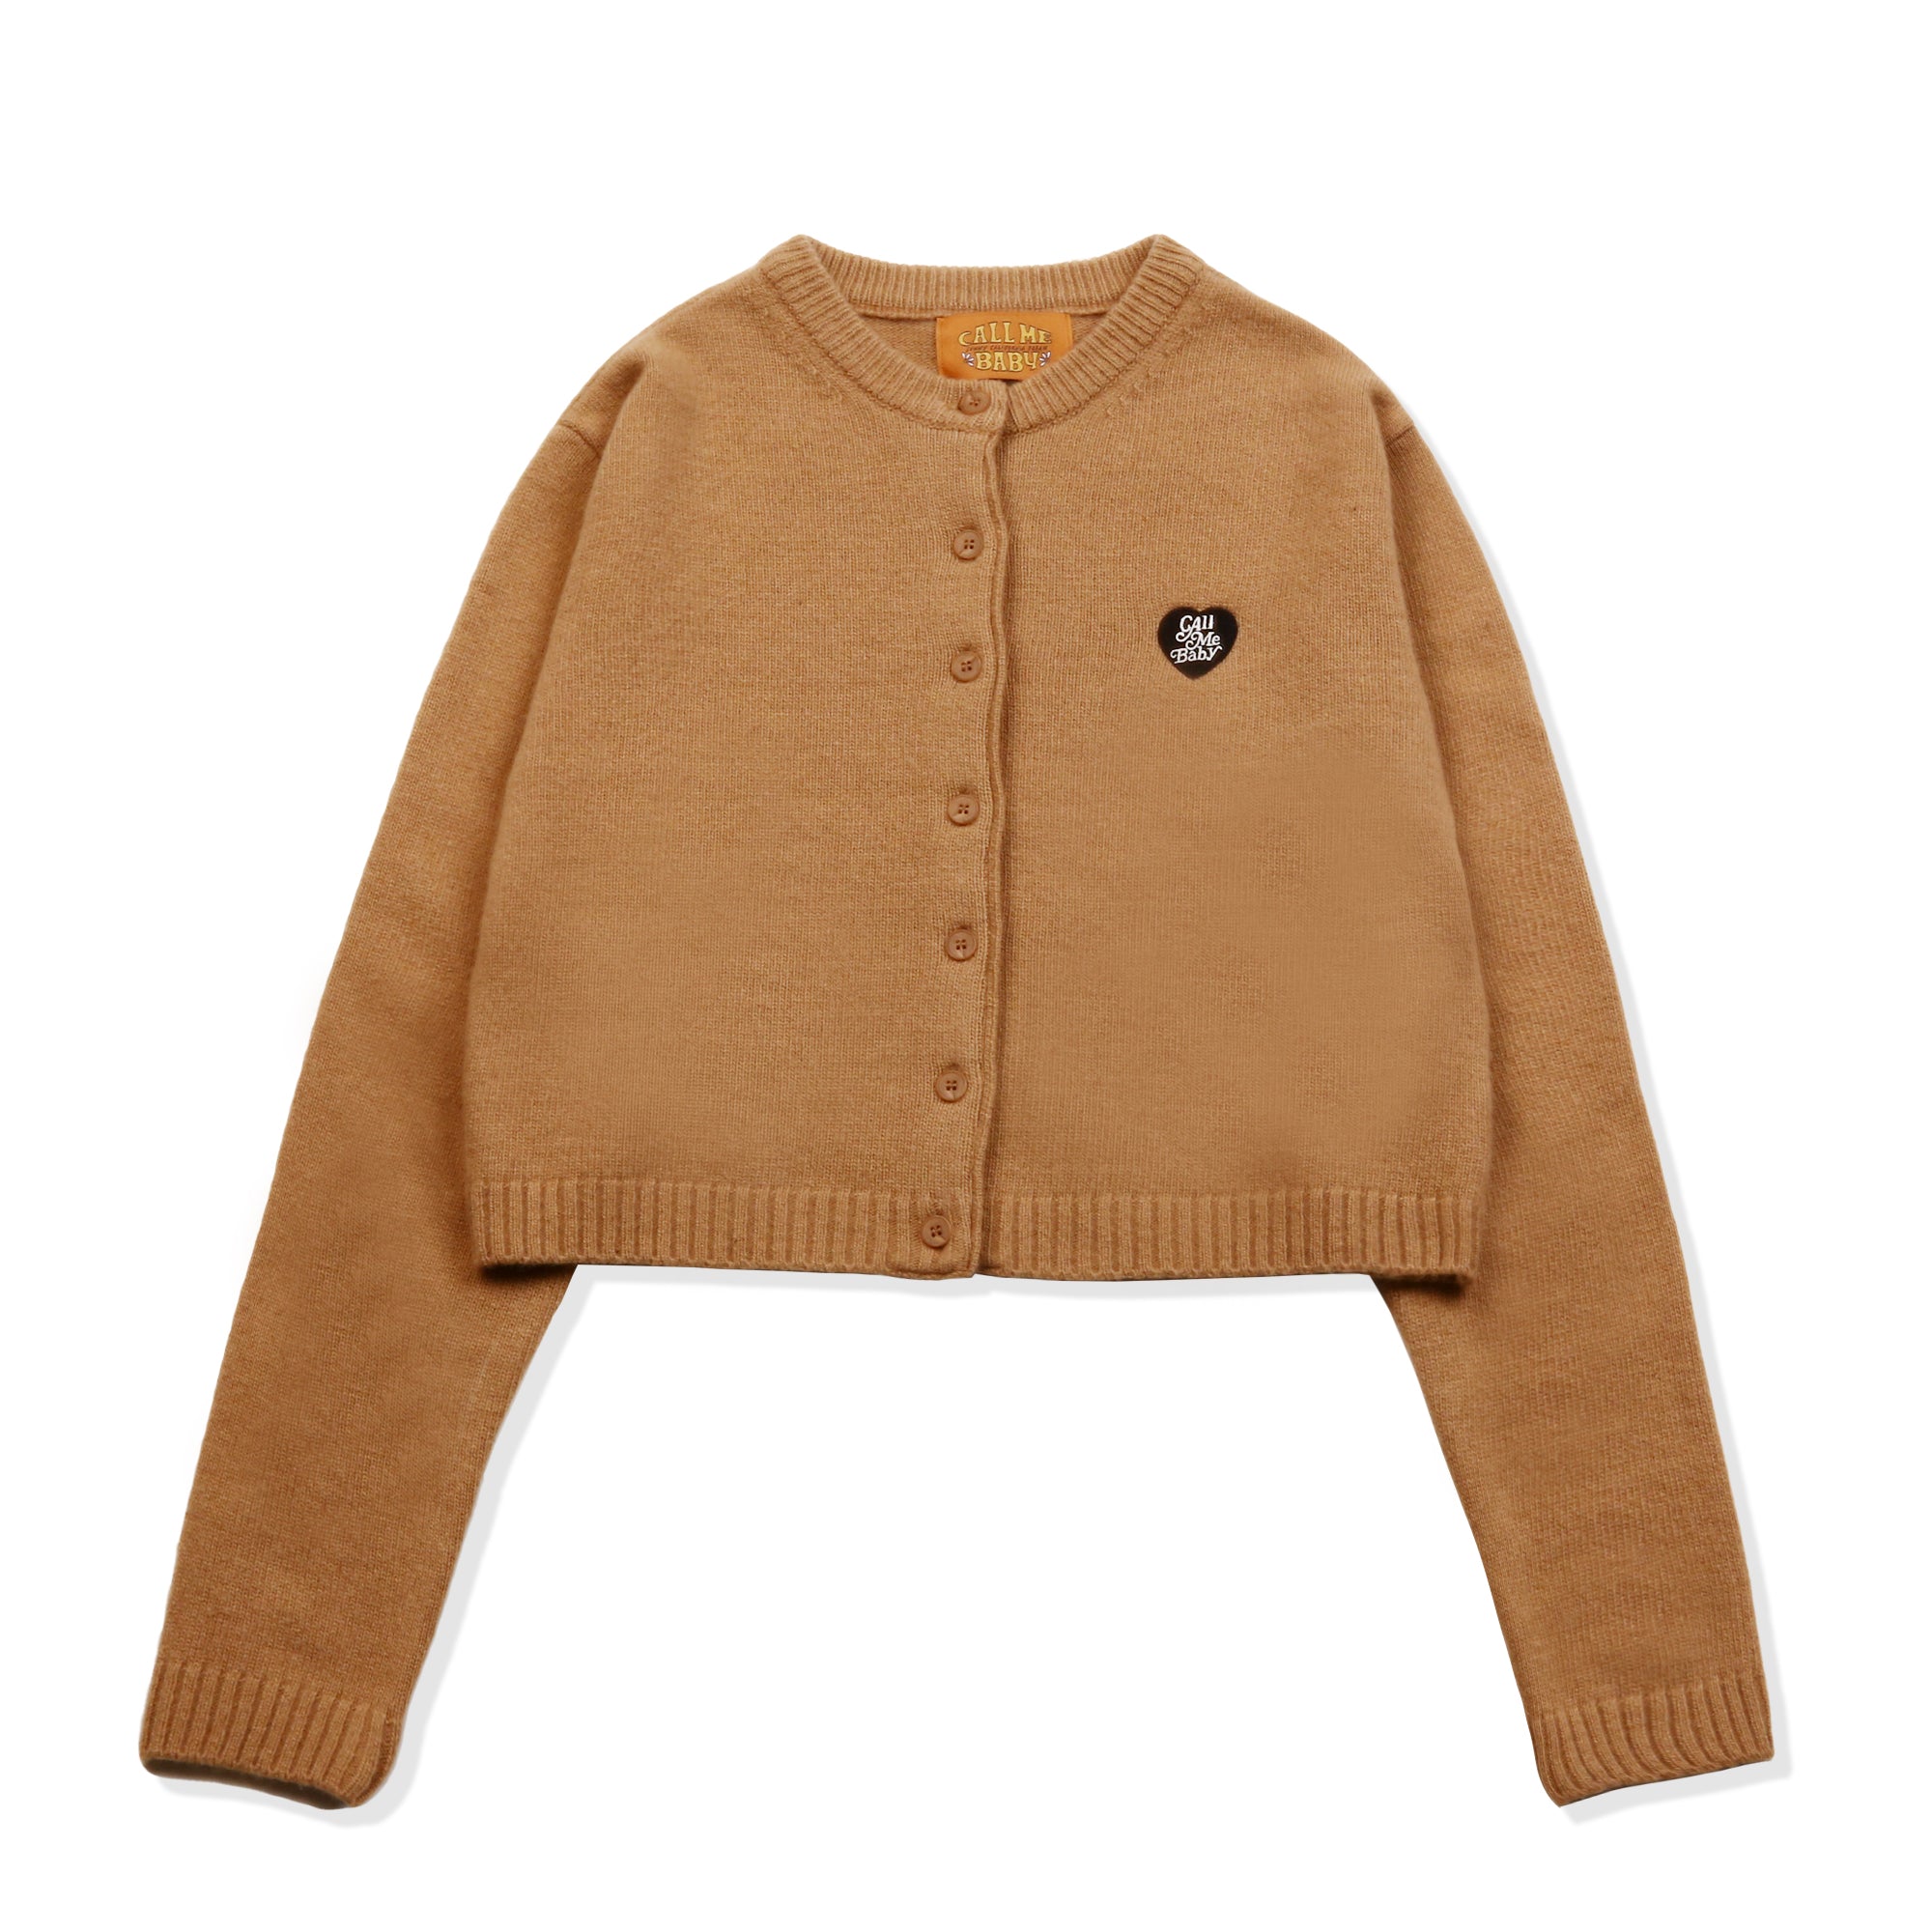 [Call Me Baby] Cashmere Baby Cardigan (Camel)